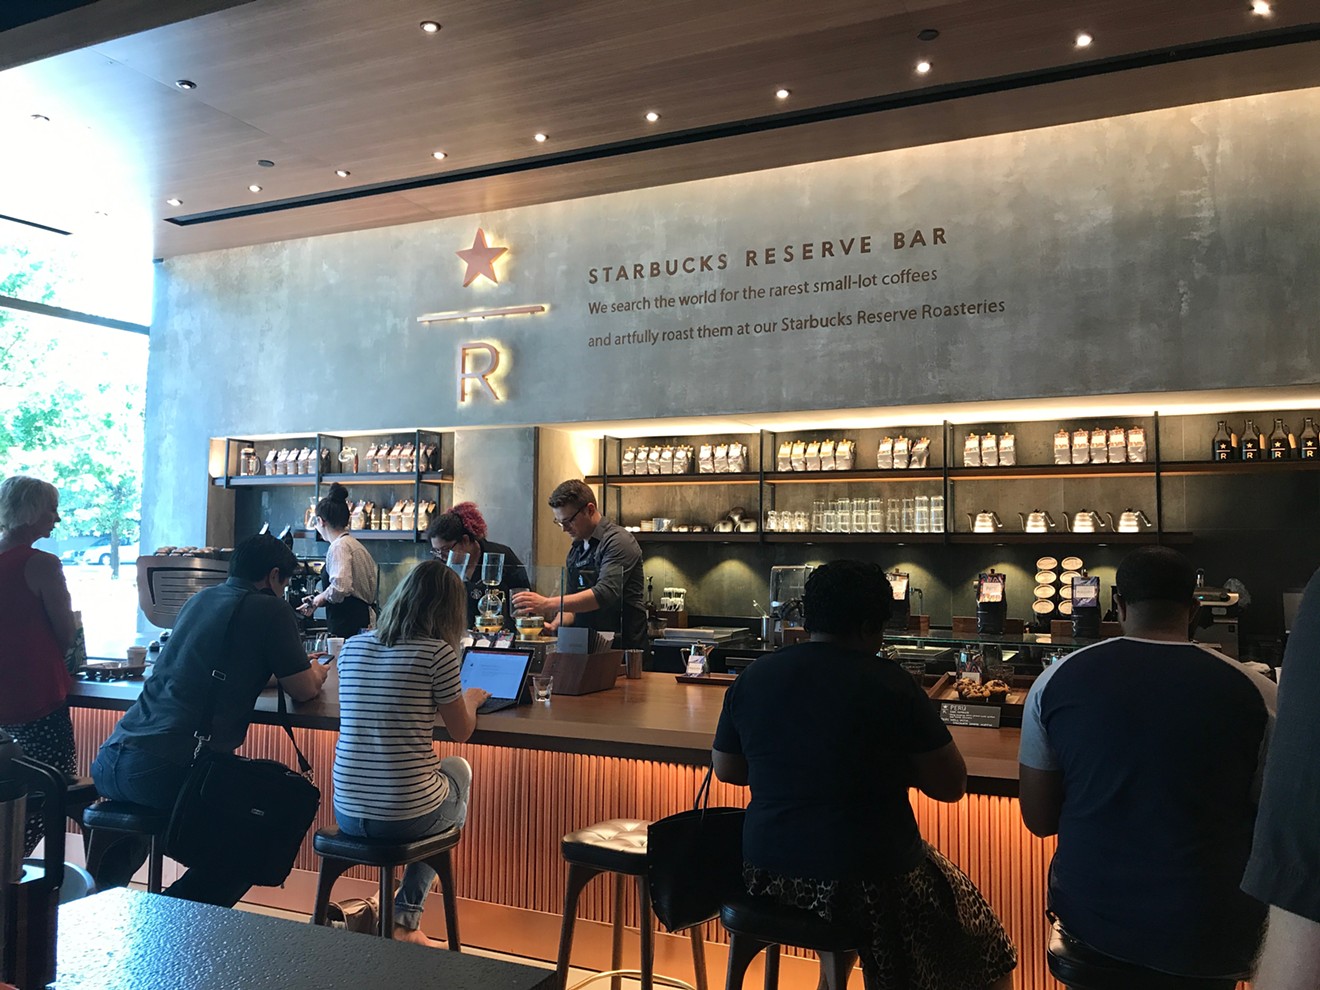 The new Starbucks Reserve Bar is in the McKinney Olive Building in Uptown.